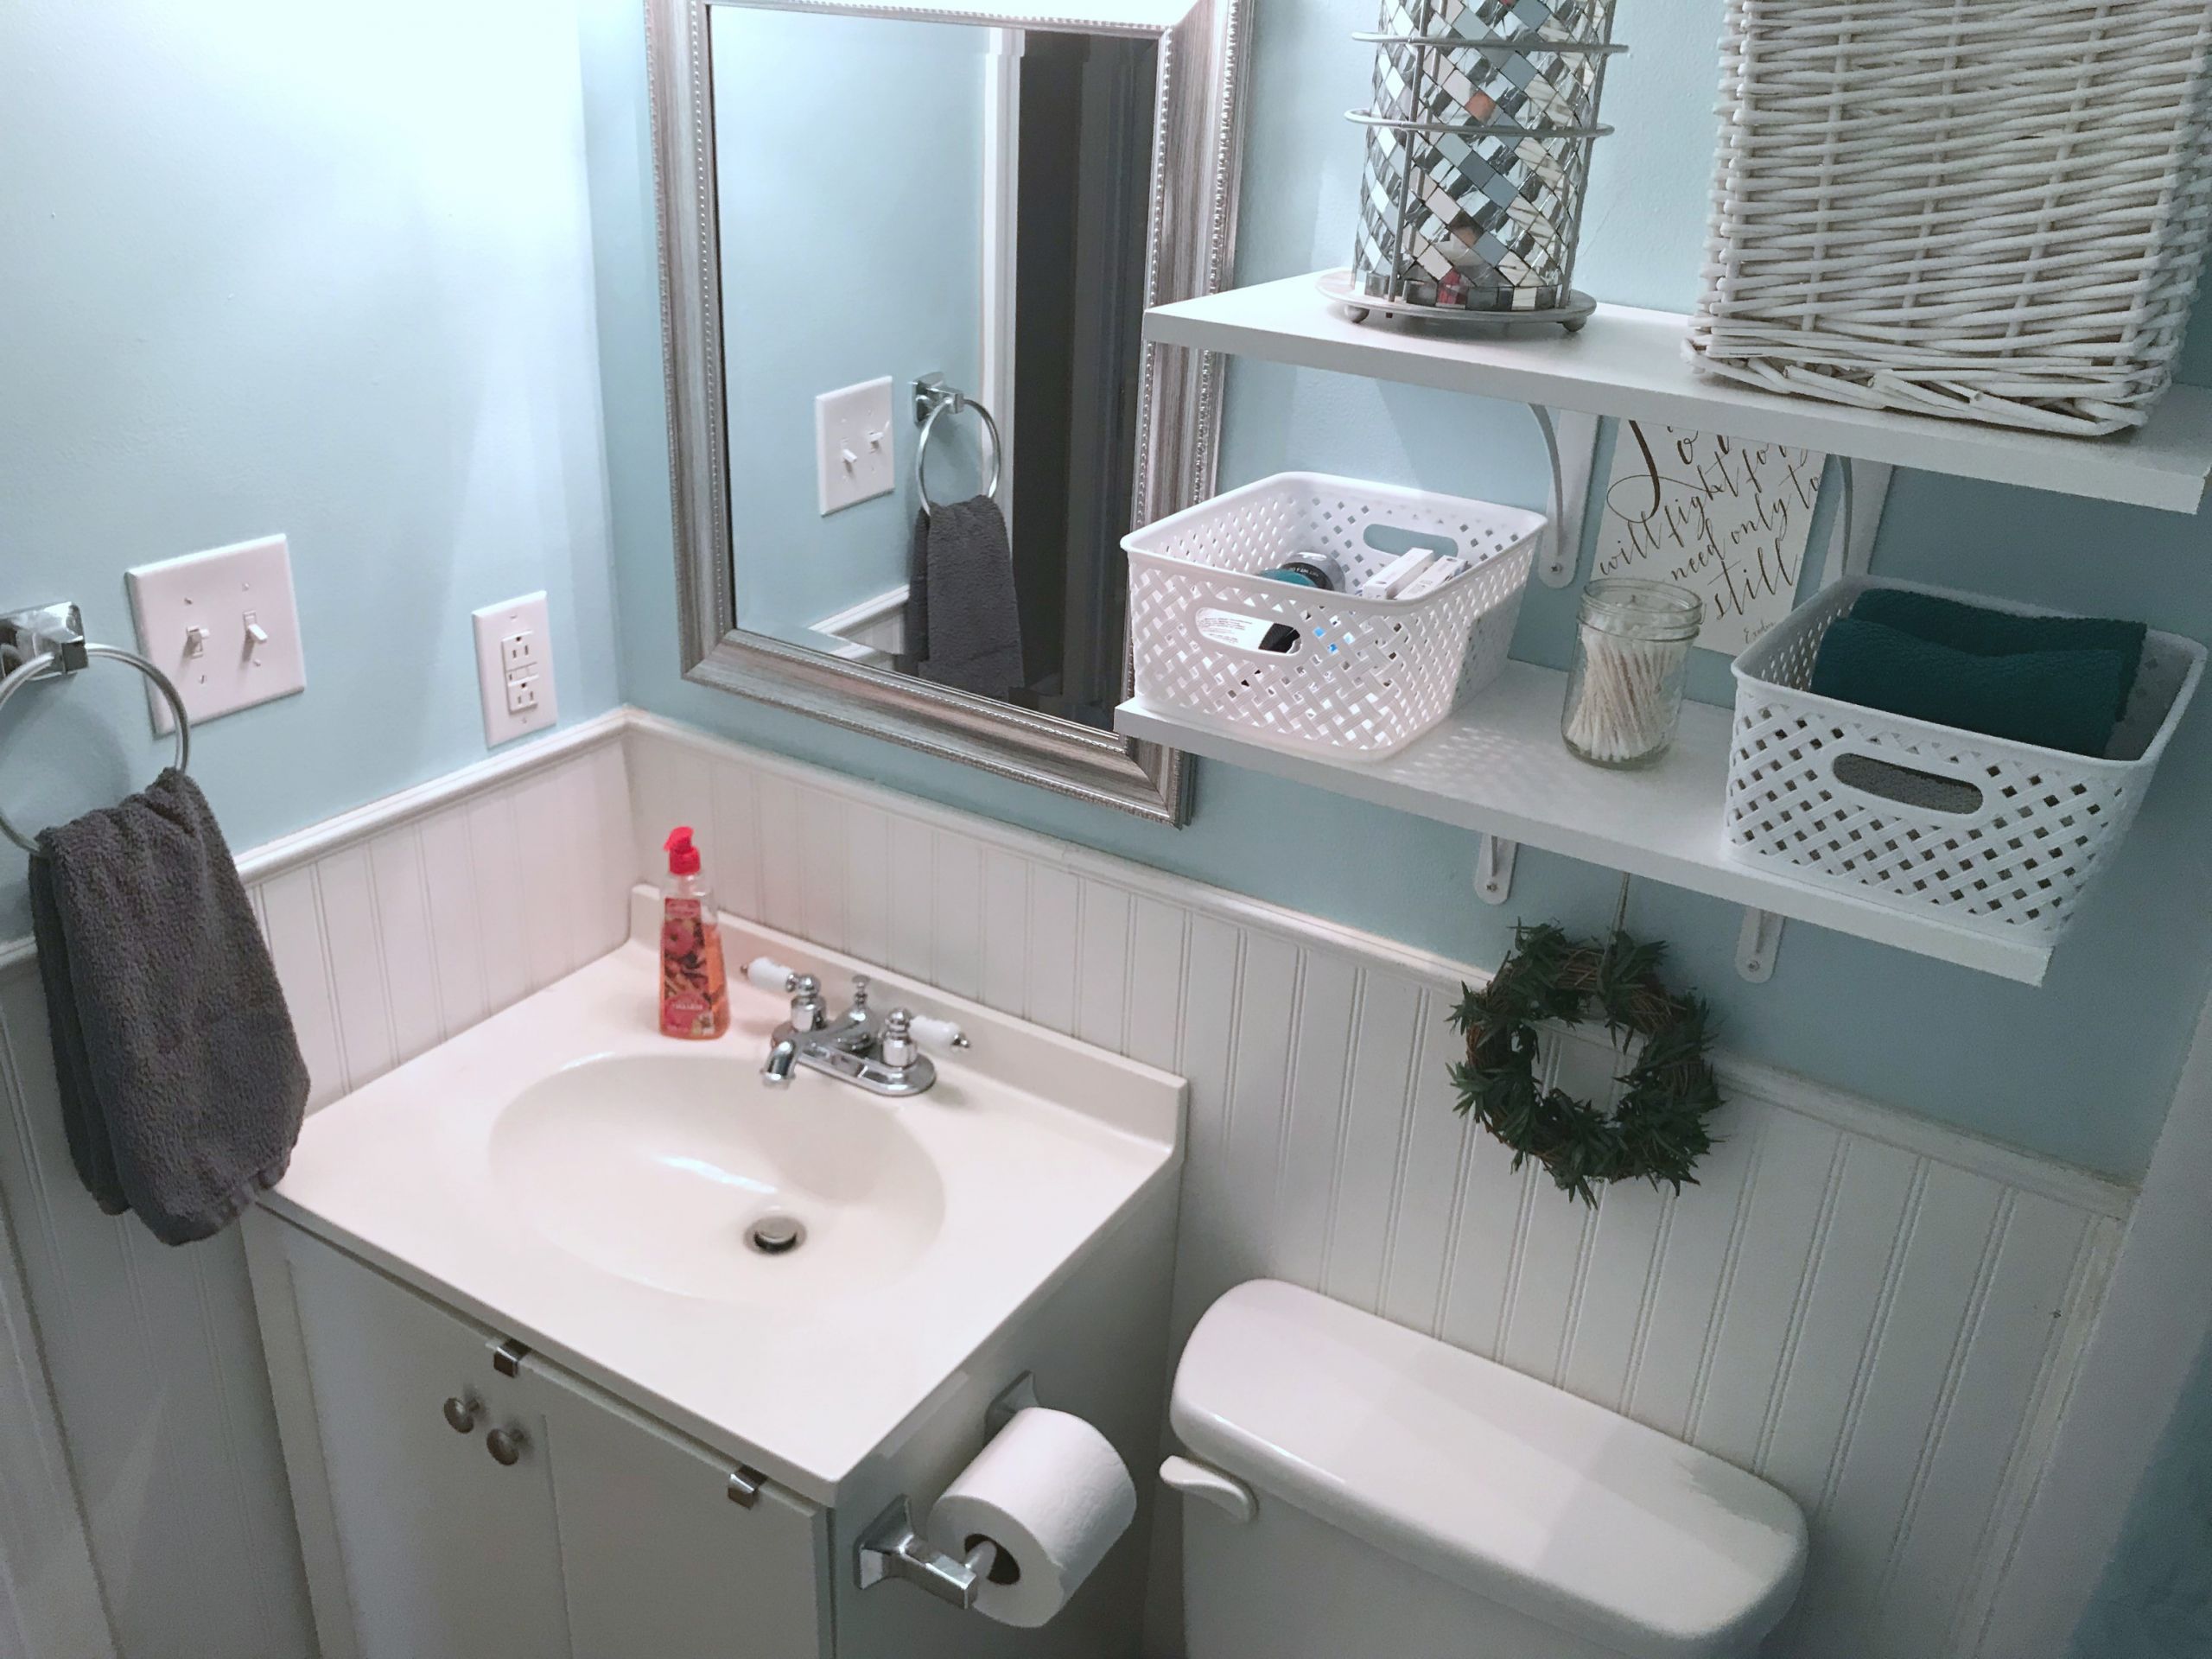 Bathroom Remodel On A Budget
 Bathroom Remodel Reveal A Bud  – e Home For fort